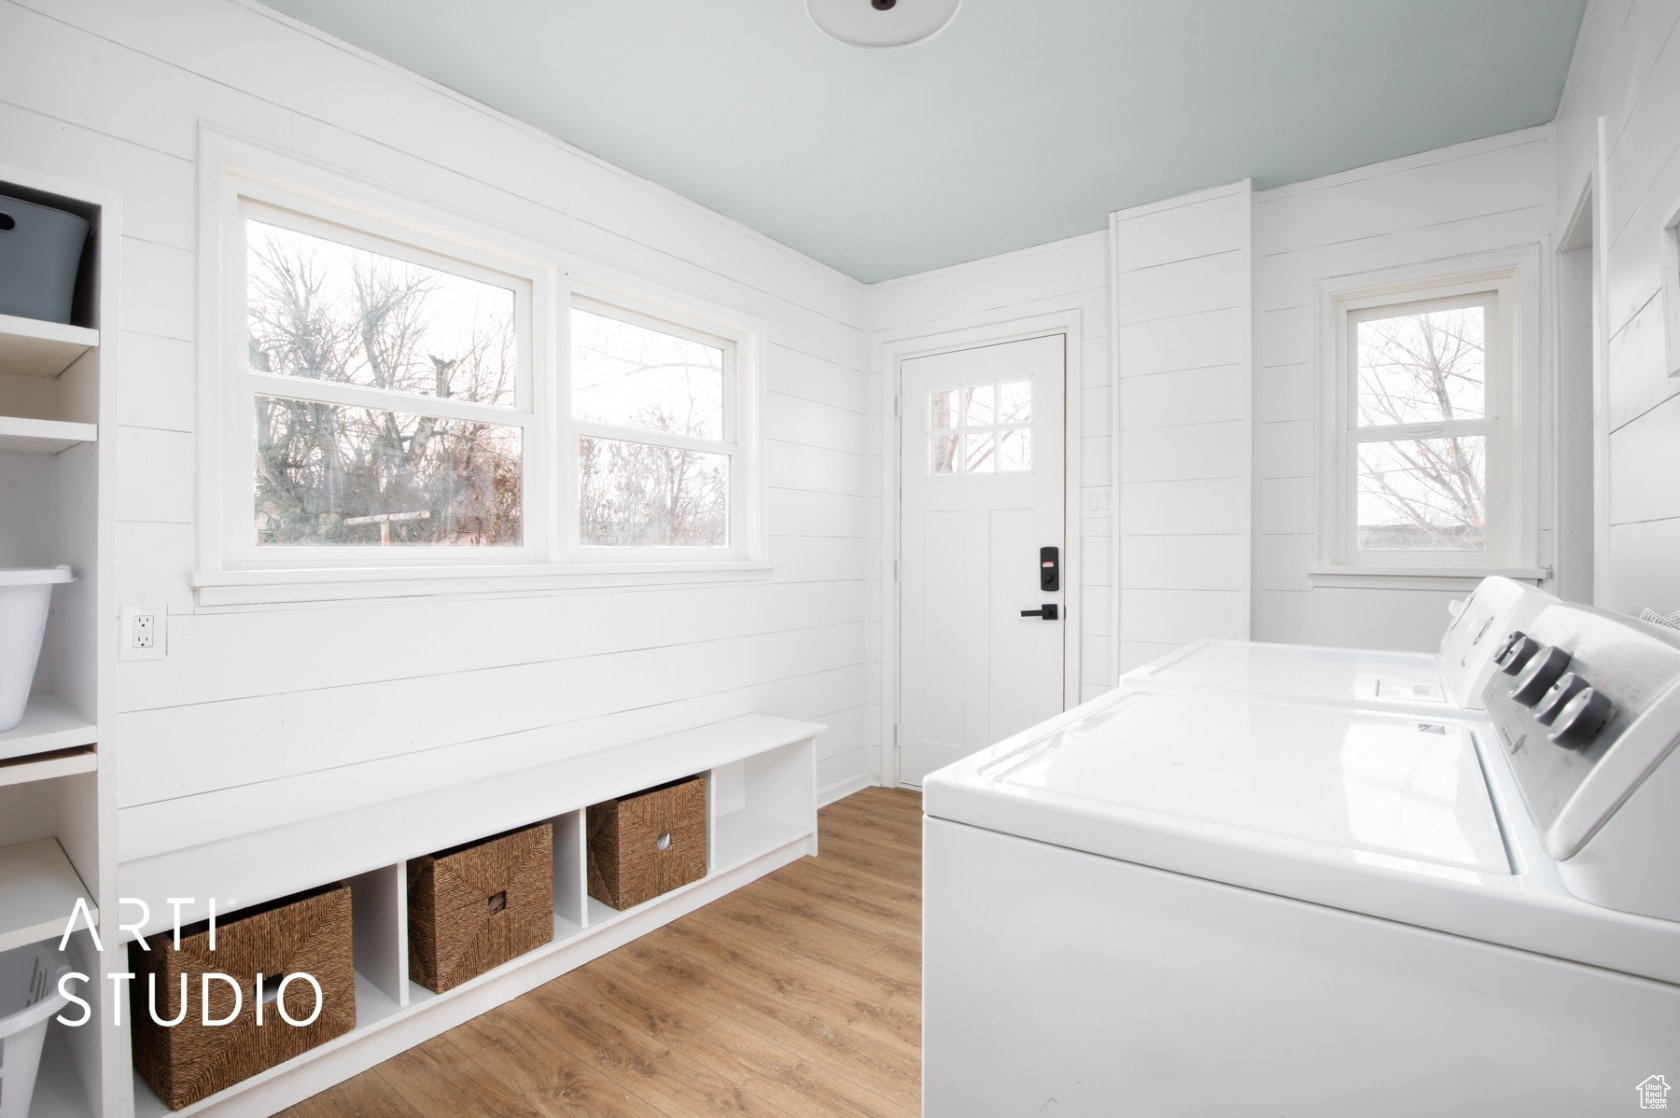 Laundry area with shiplap wall, wood-style LVP floors, built in bench and tower storage and washer and dryer